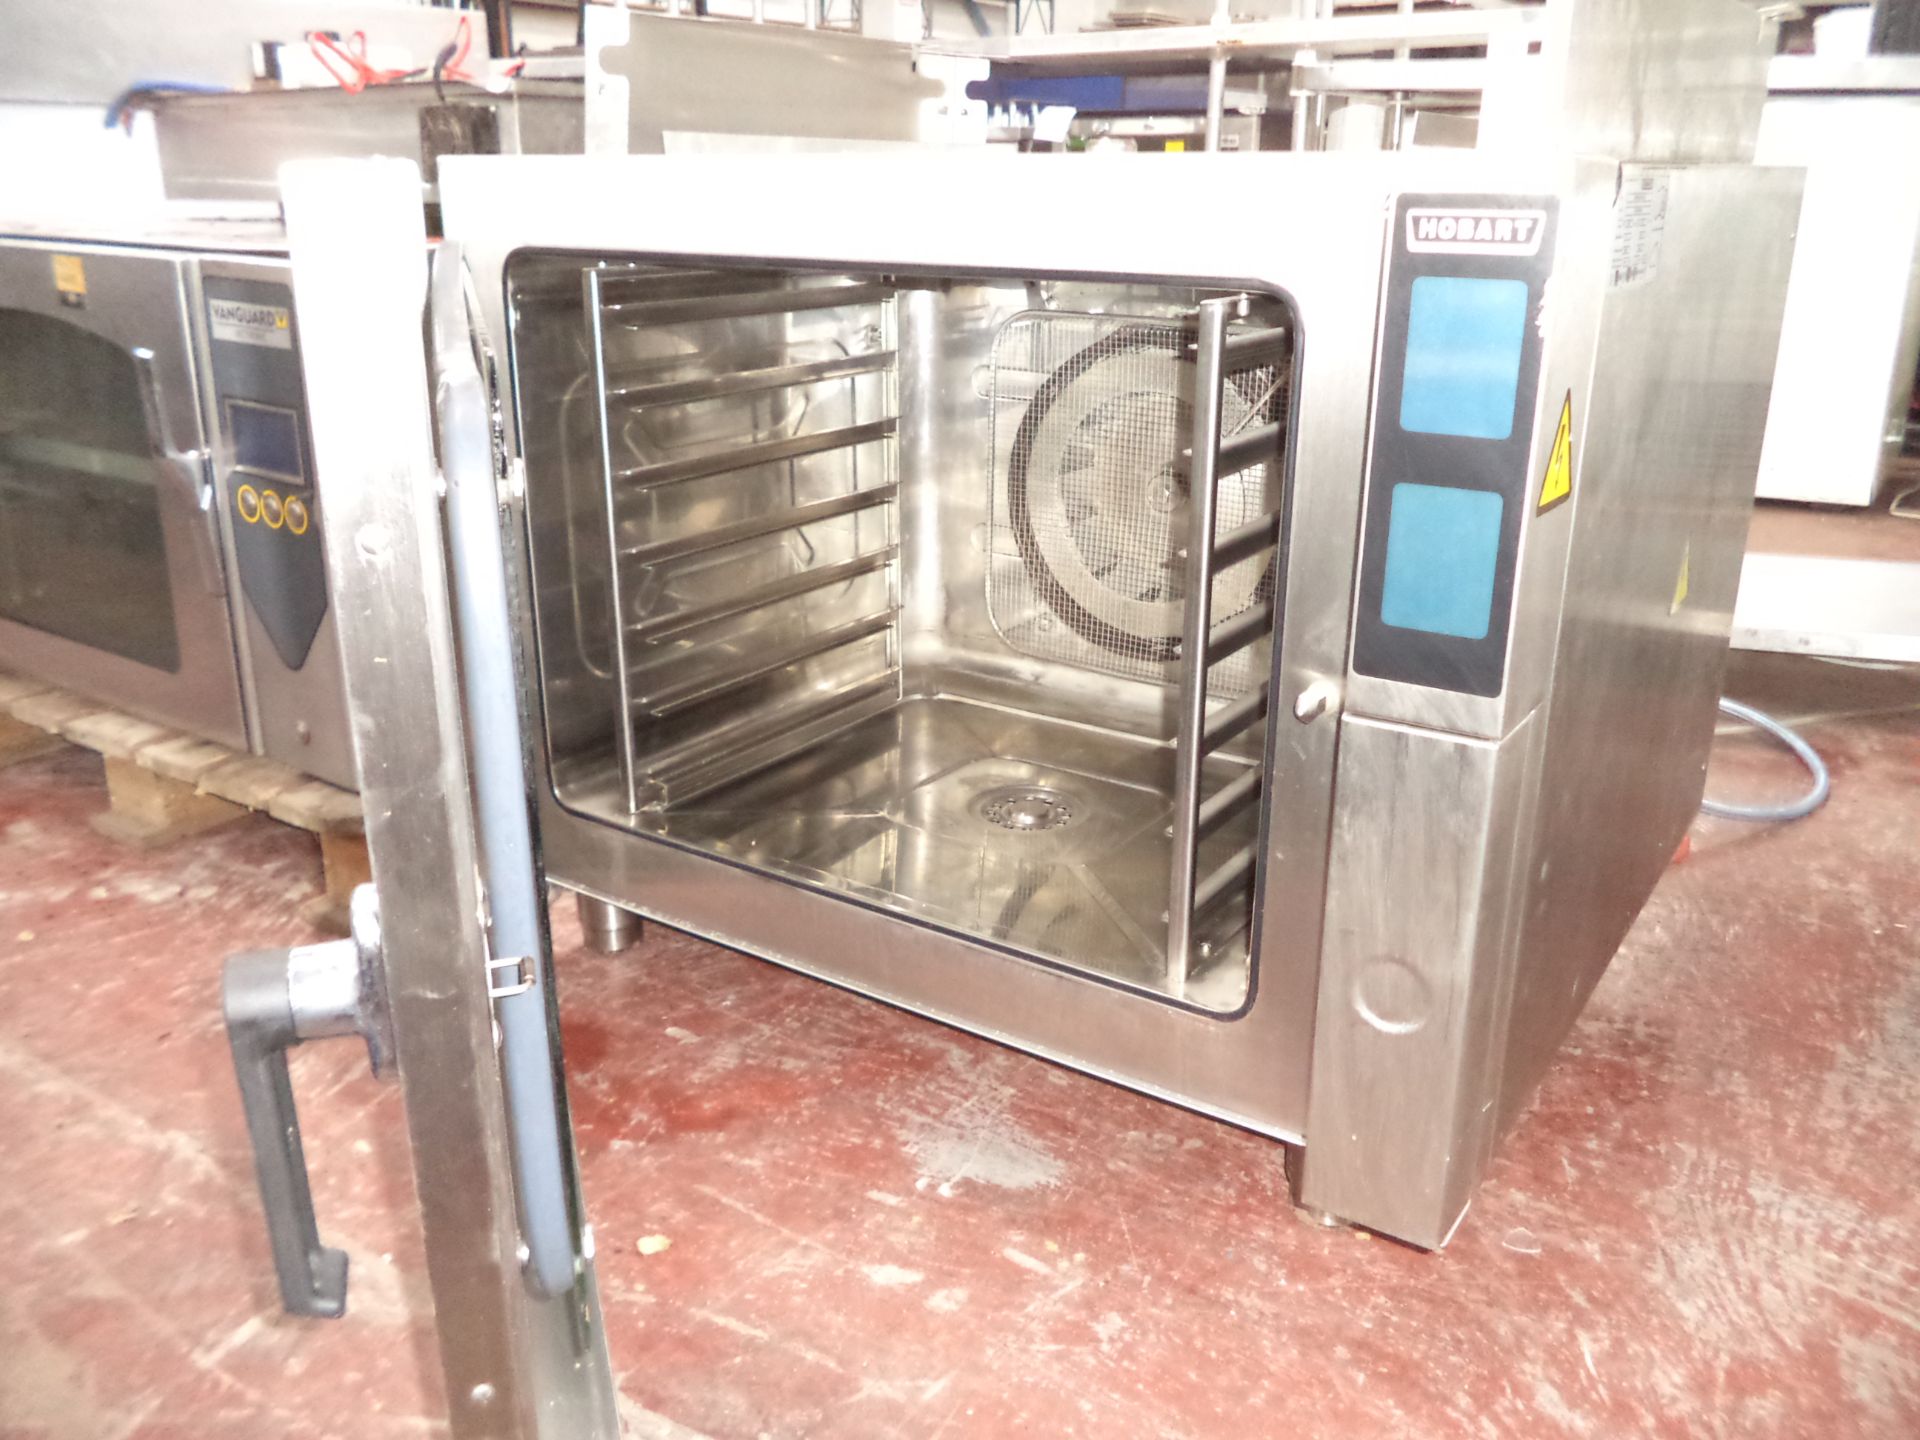 Hobart oven, model CPRO-061G-DA-KK IMPORTANT: Please remember goods successfully bid upon must be - Image 4 of 7